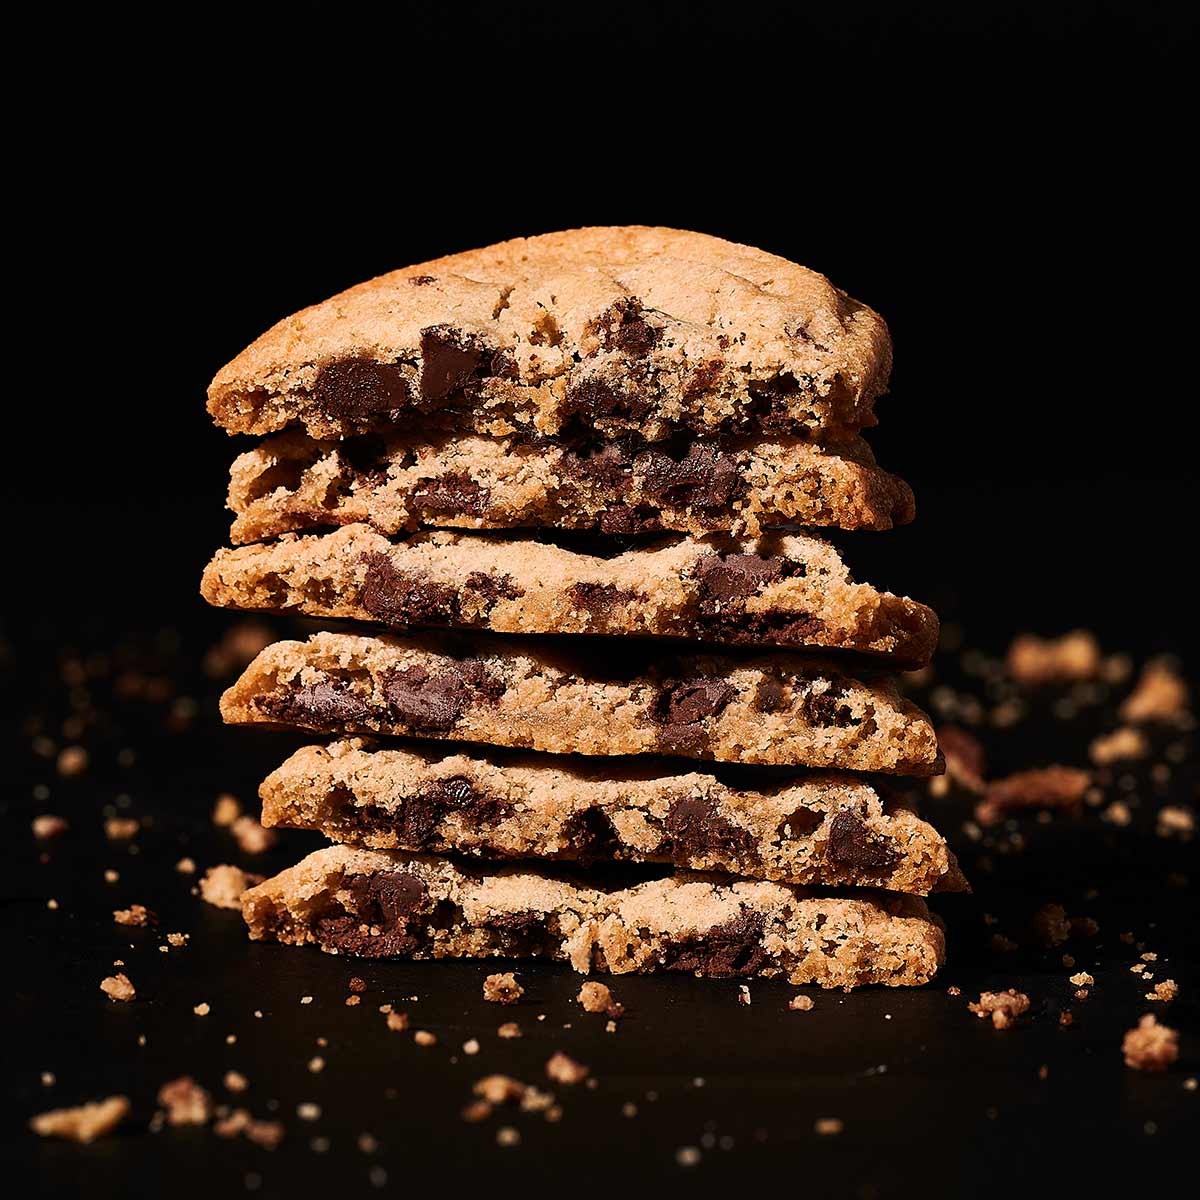 A stack of six chocolate-chip cookies cut in half.